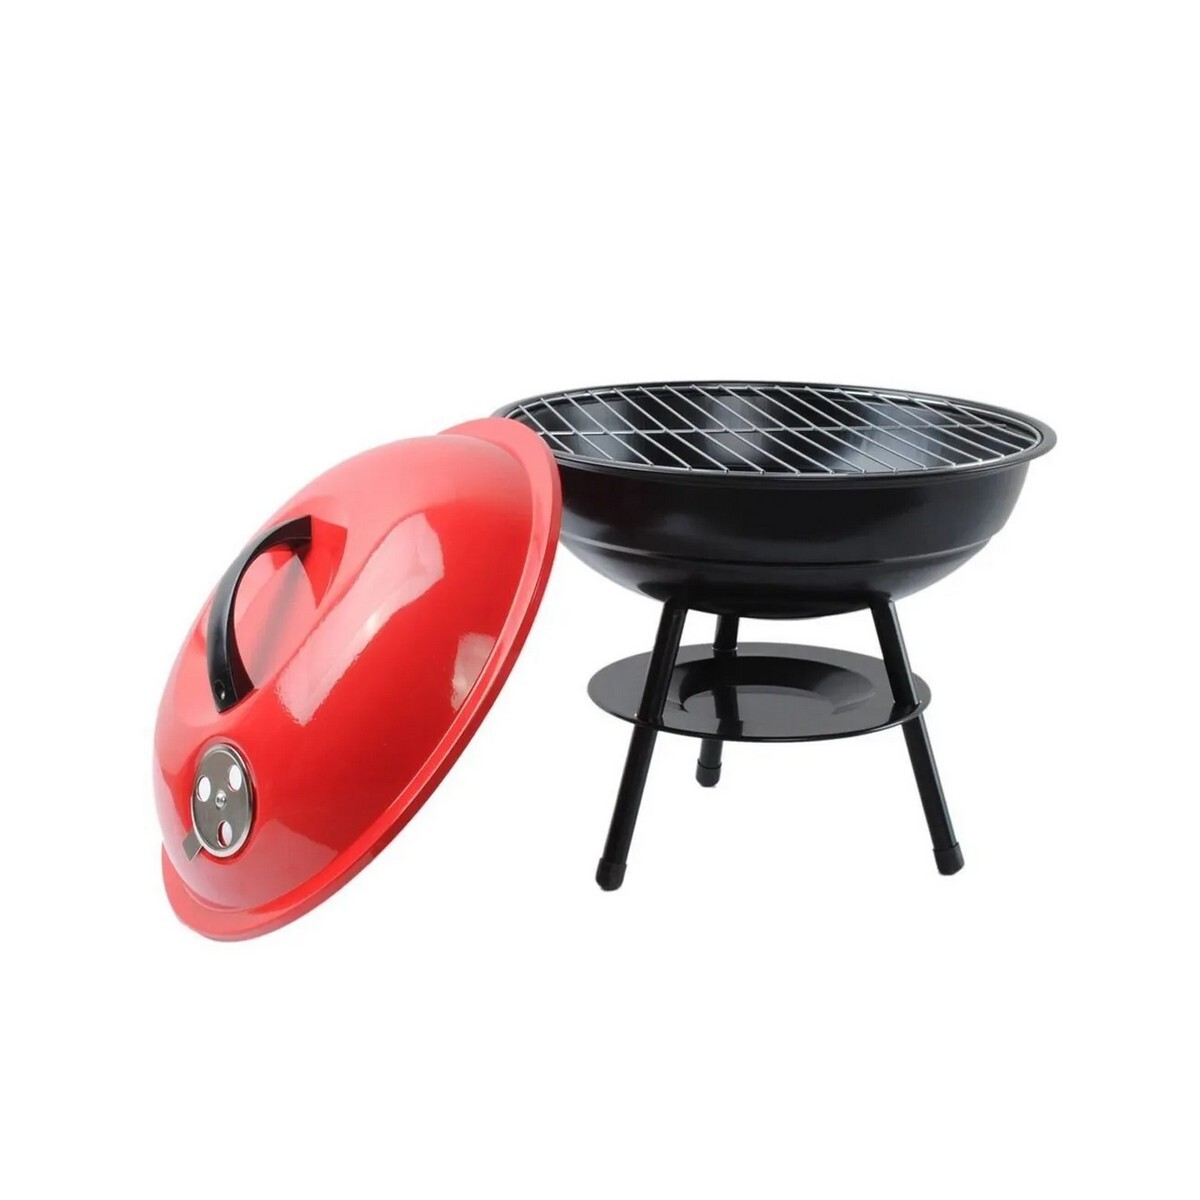 Relax BBQ Grill Basket YS-14